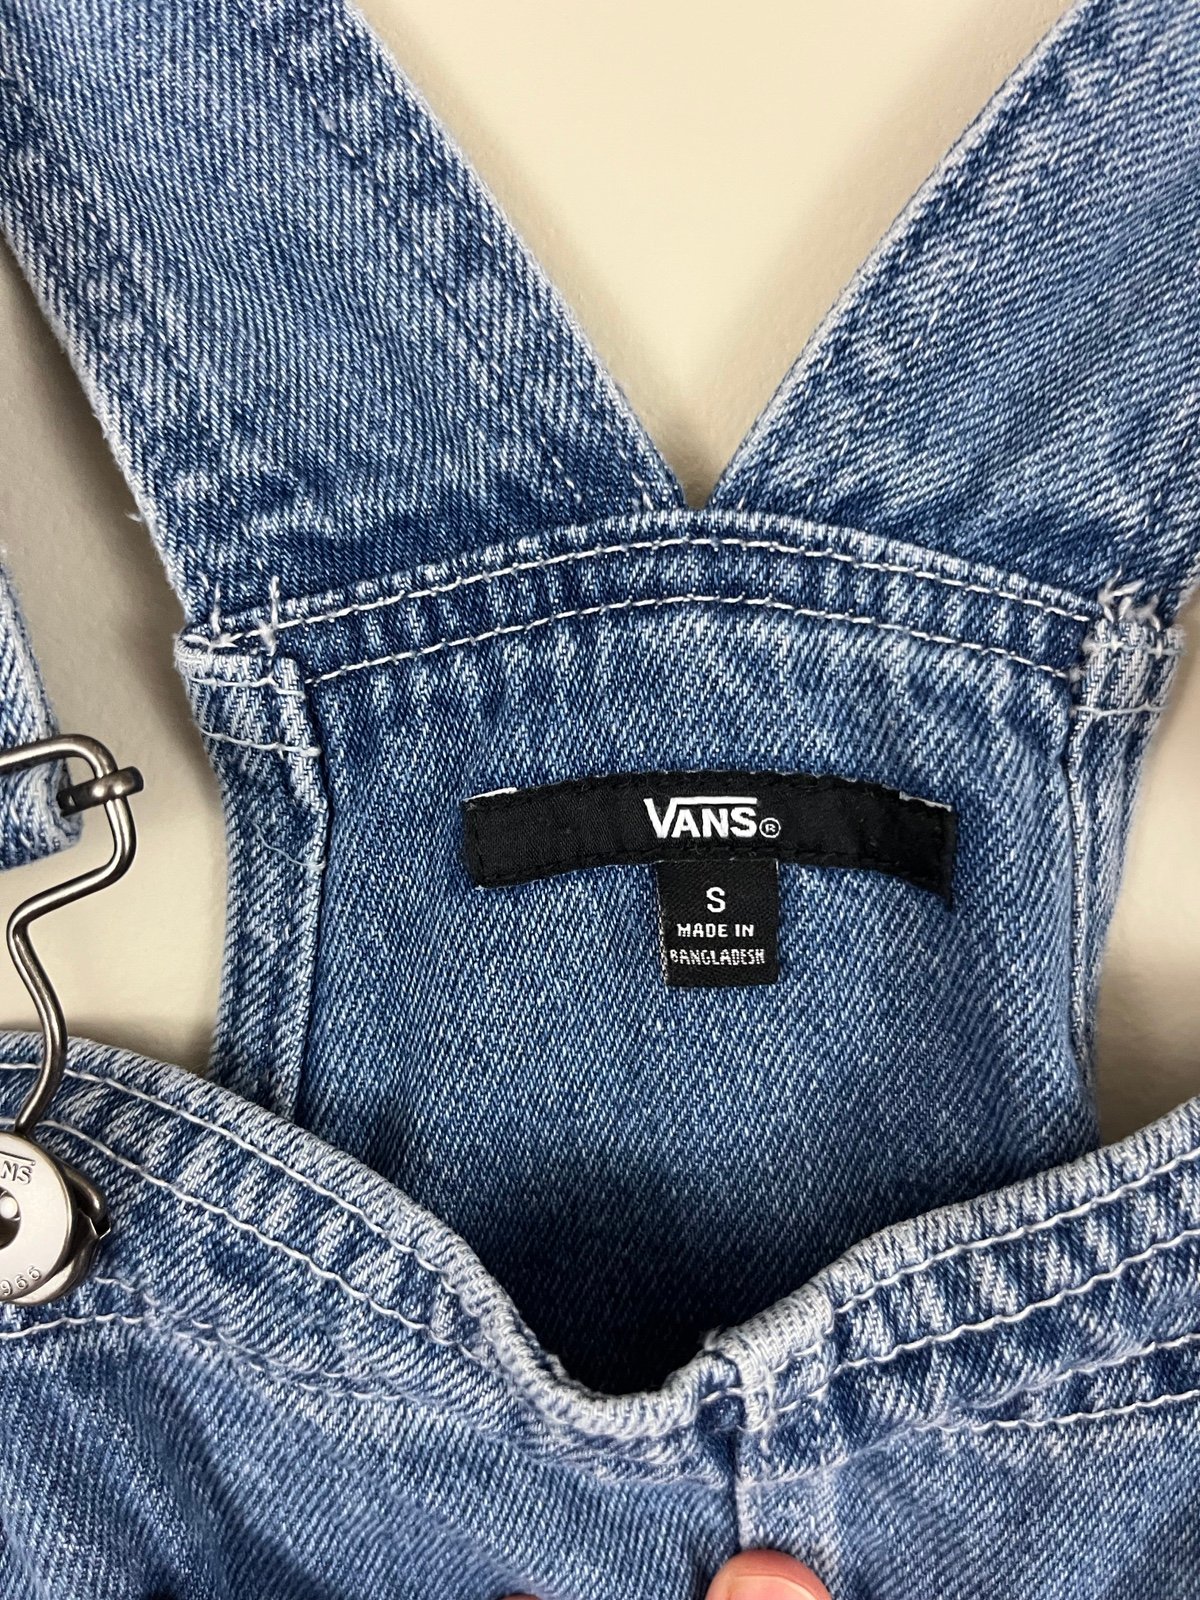 Factory Direct  Vans Groundwork Denim Overall Stone Wash Womens Size Small Brand New pHjN1U9FF Novel 